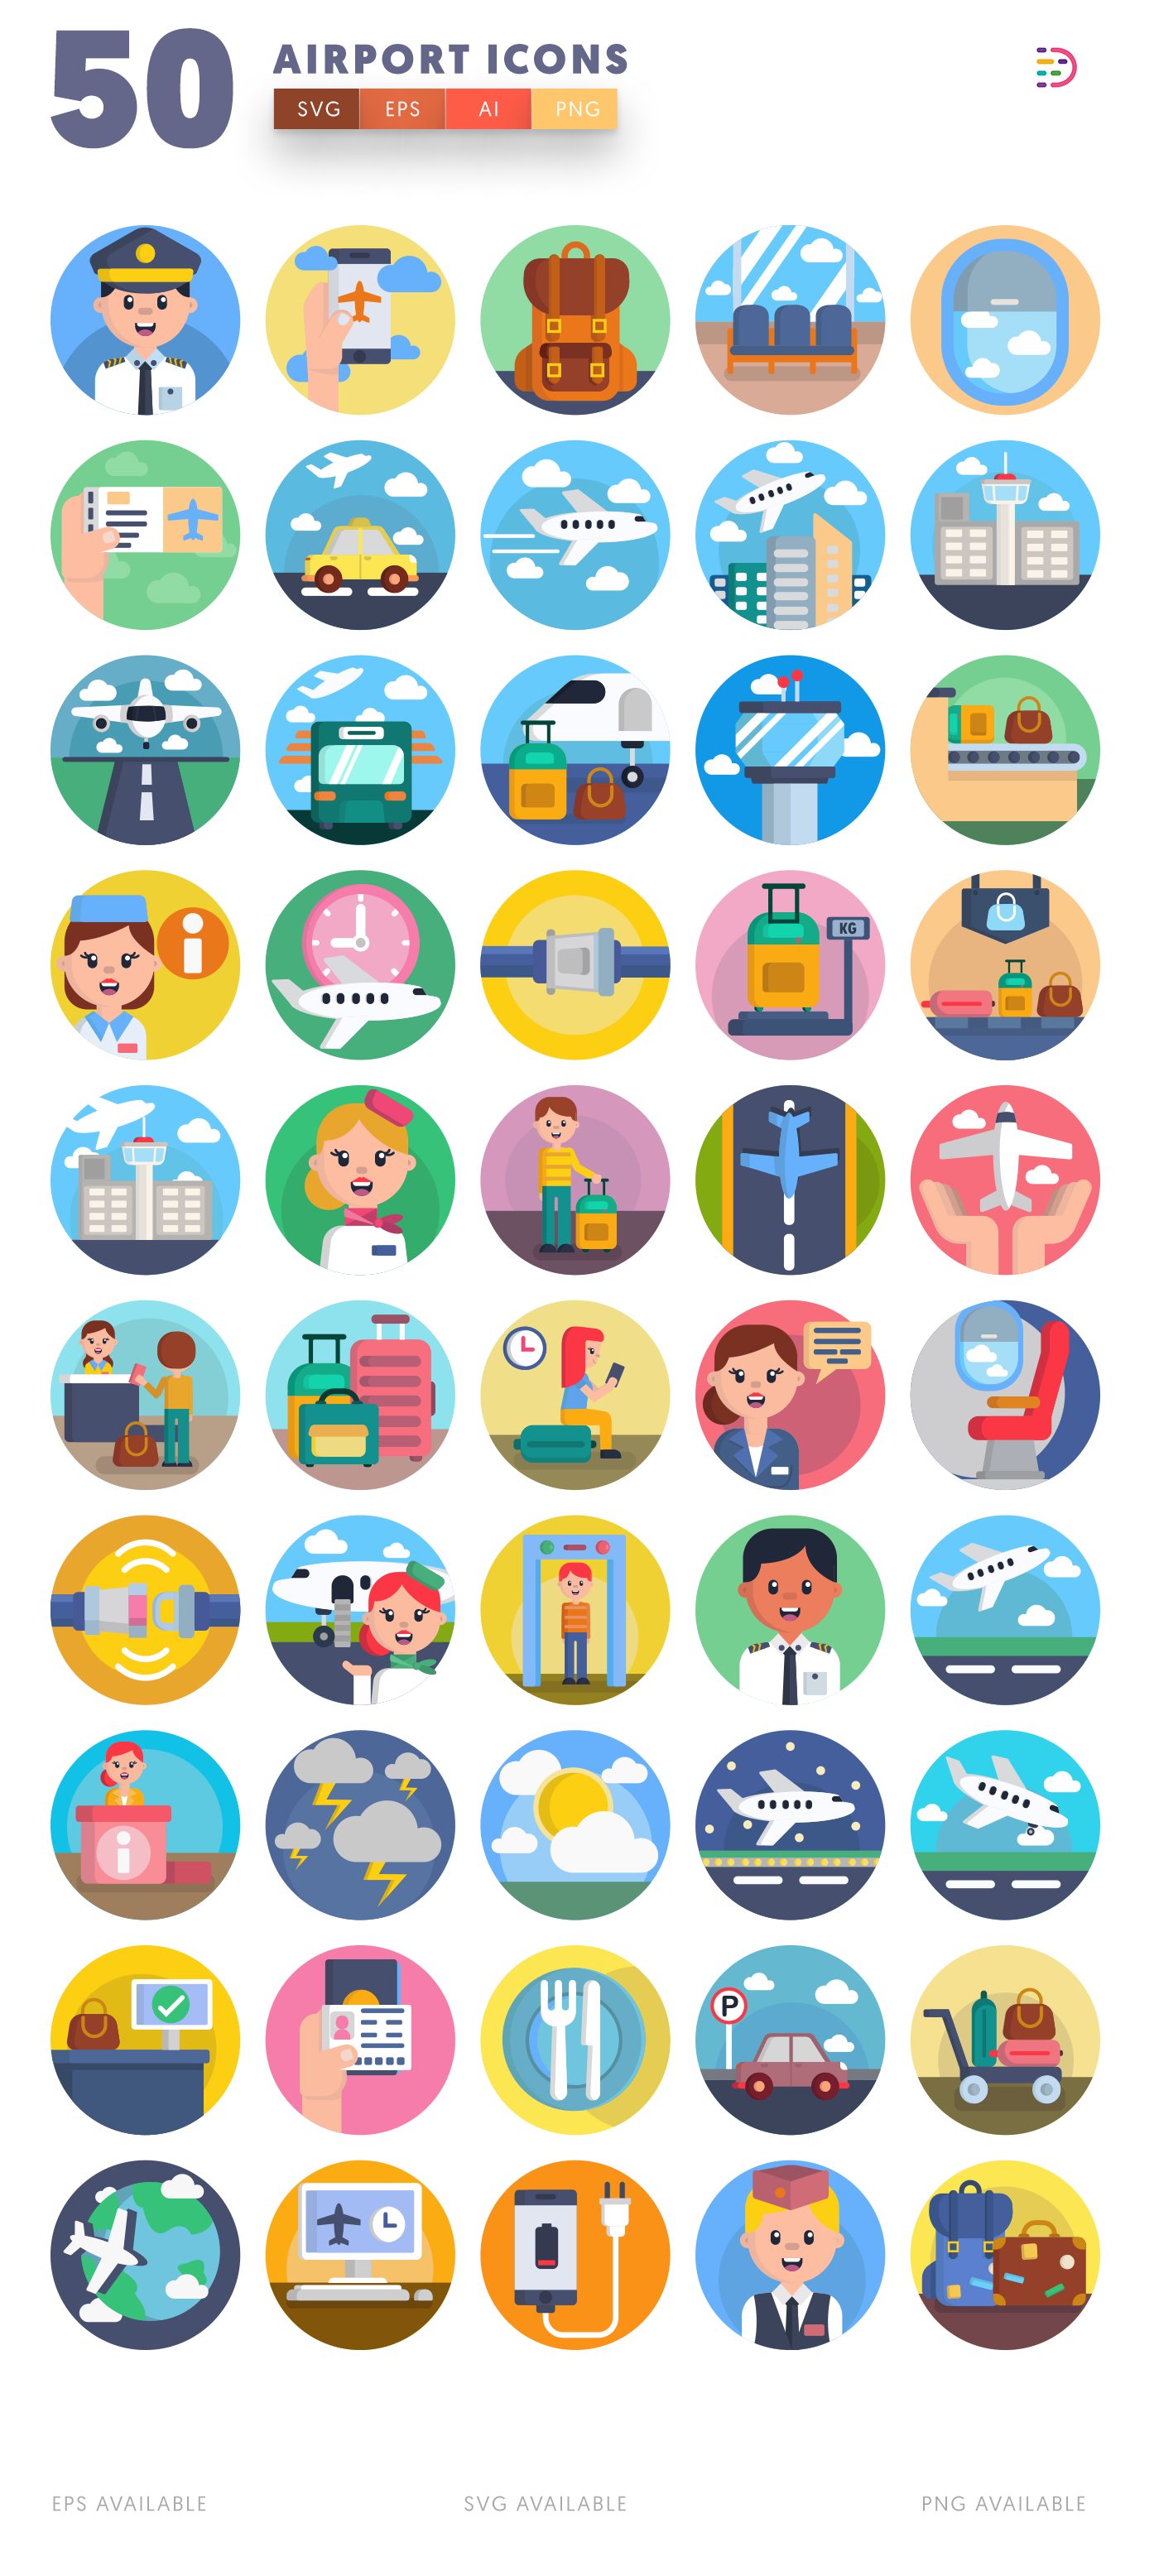 Airport icon pack